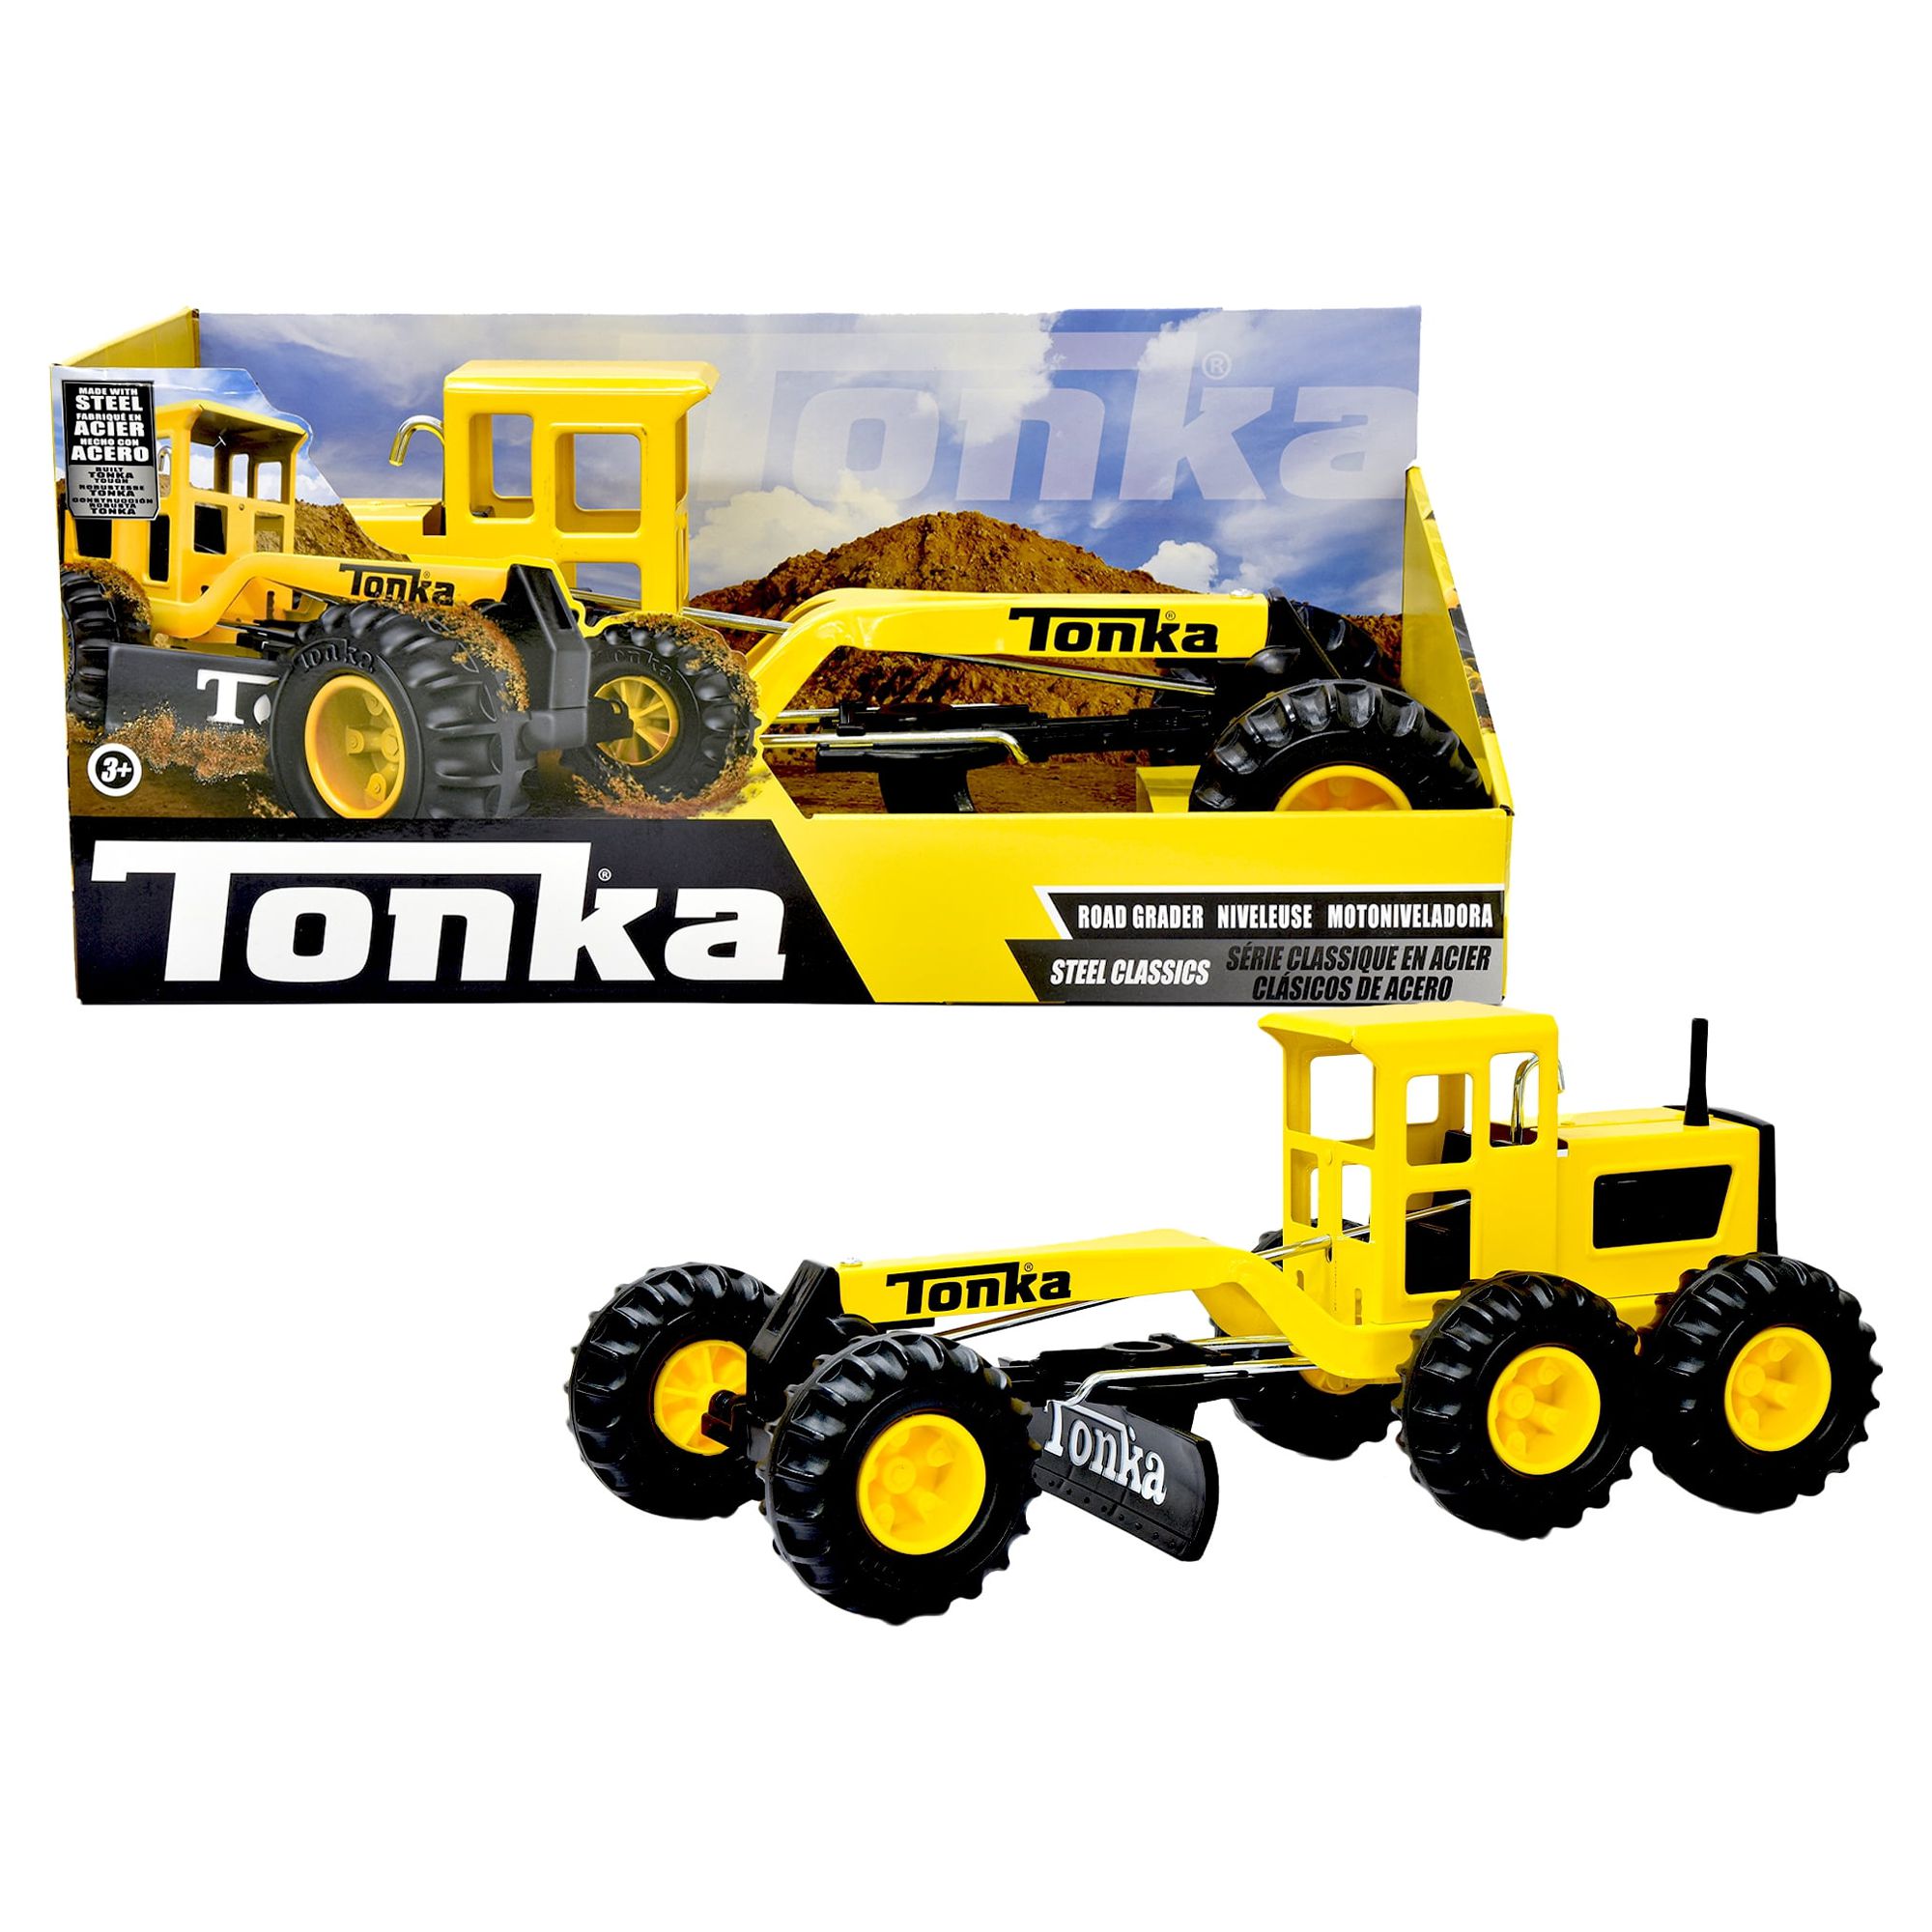 Tonka Steel Classics Road Grader, 17" Long, Moveable Blade & Lever Axle Steering, Toy Vehicle, Toy Truck, Realistic & Creative Construction Play, Great Gift, Kids Ages 3+ - image 1 of 6